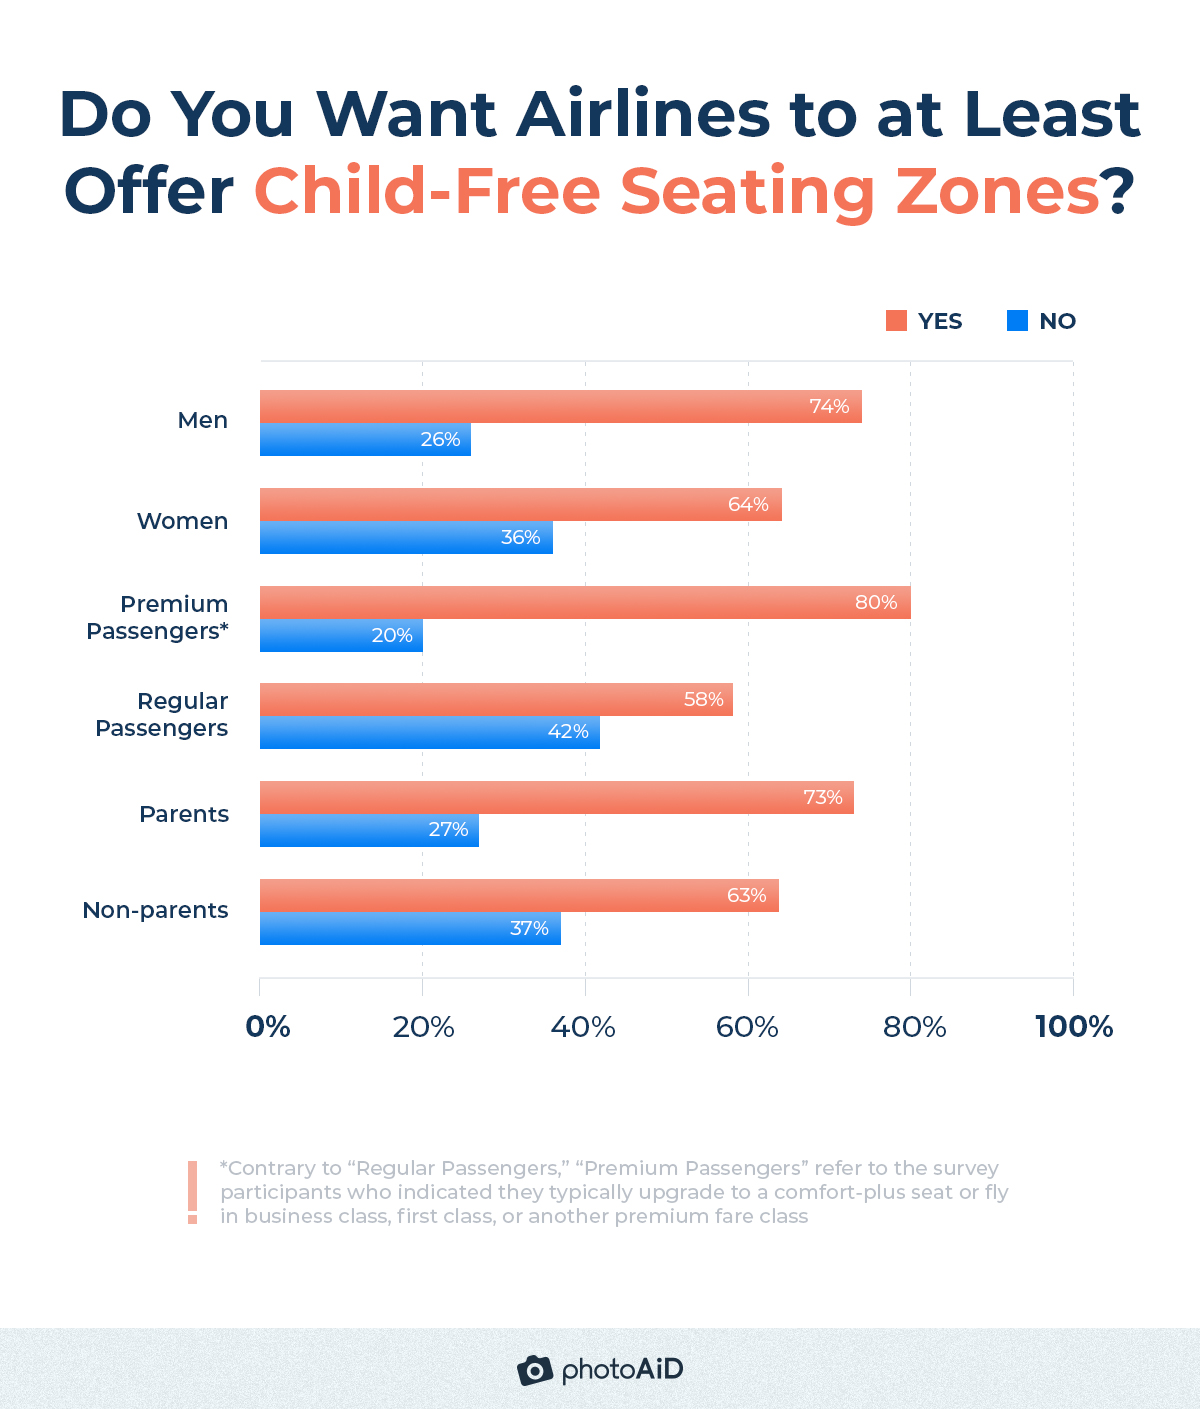 Of 18% of Americans who previously indicated they were against the idea of adult-only flights, 69% are OK with child-free seating zones